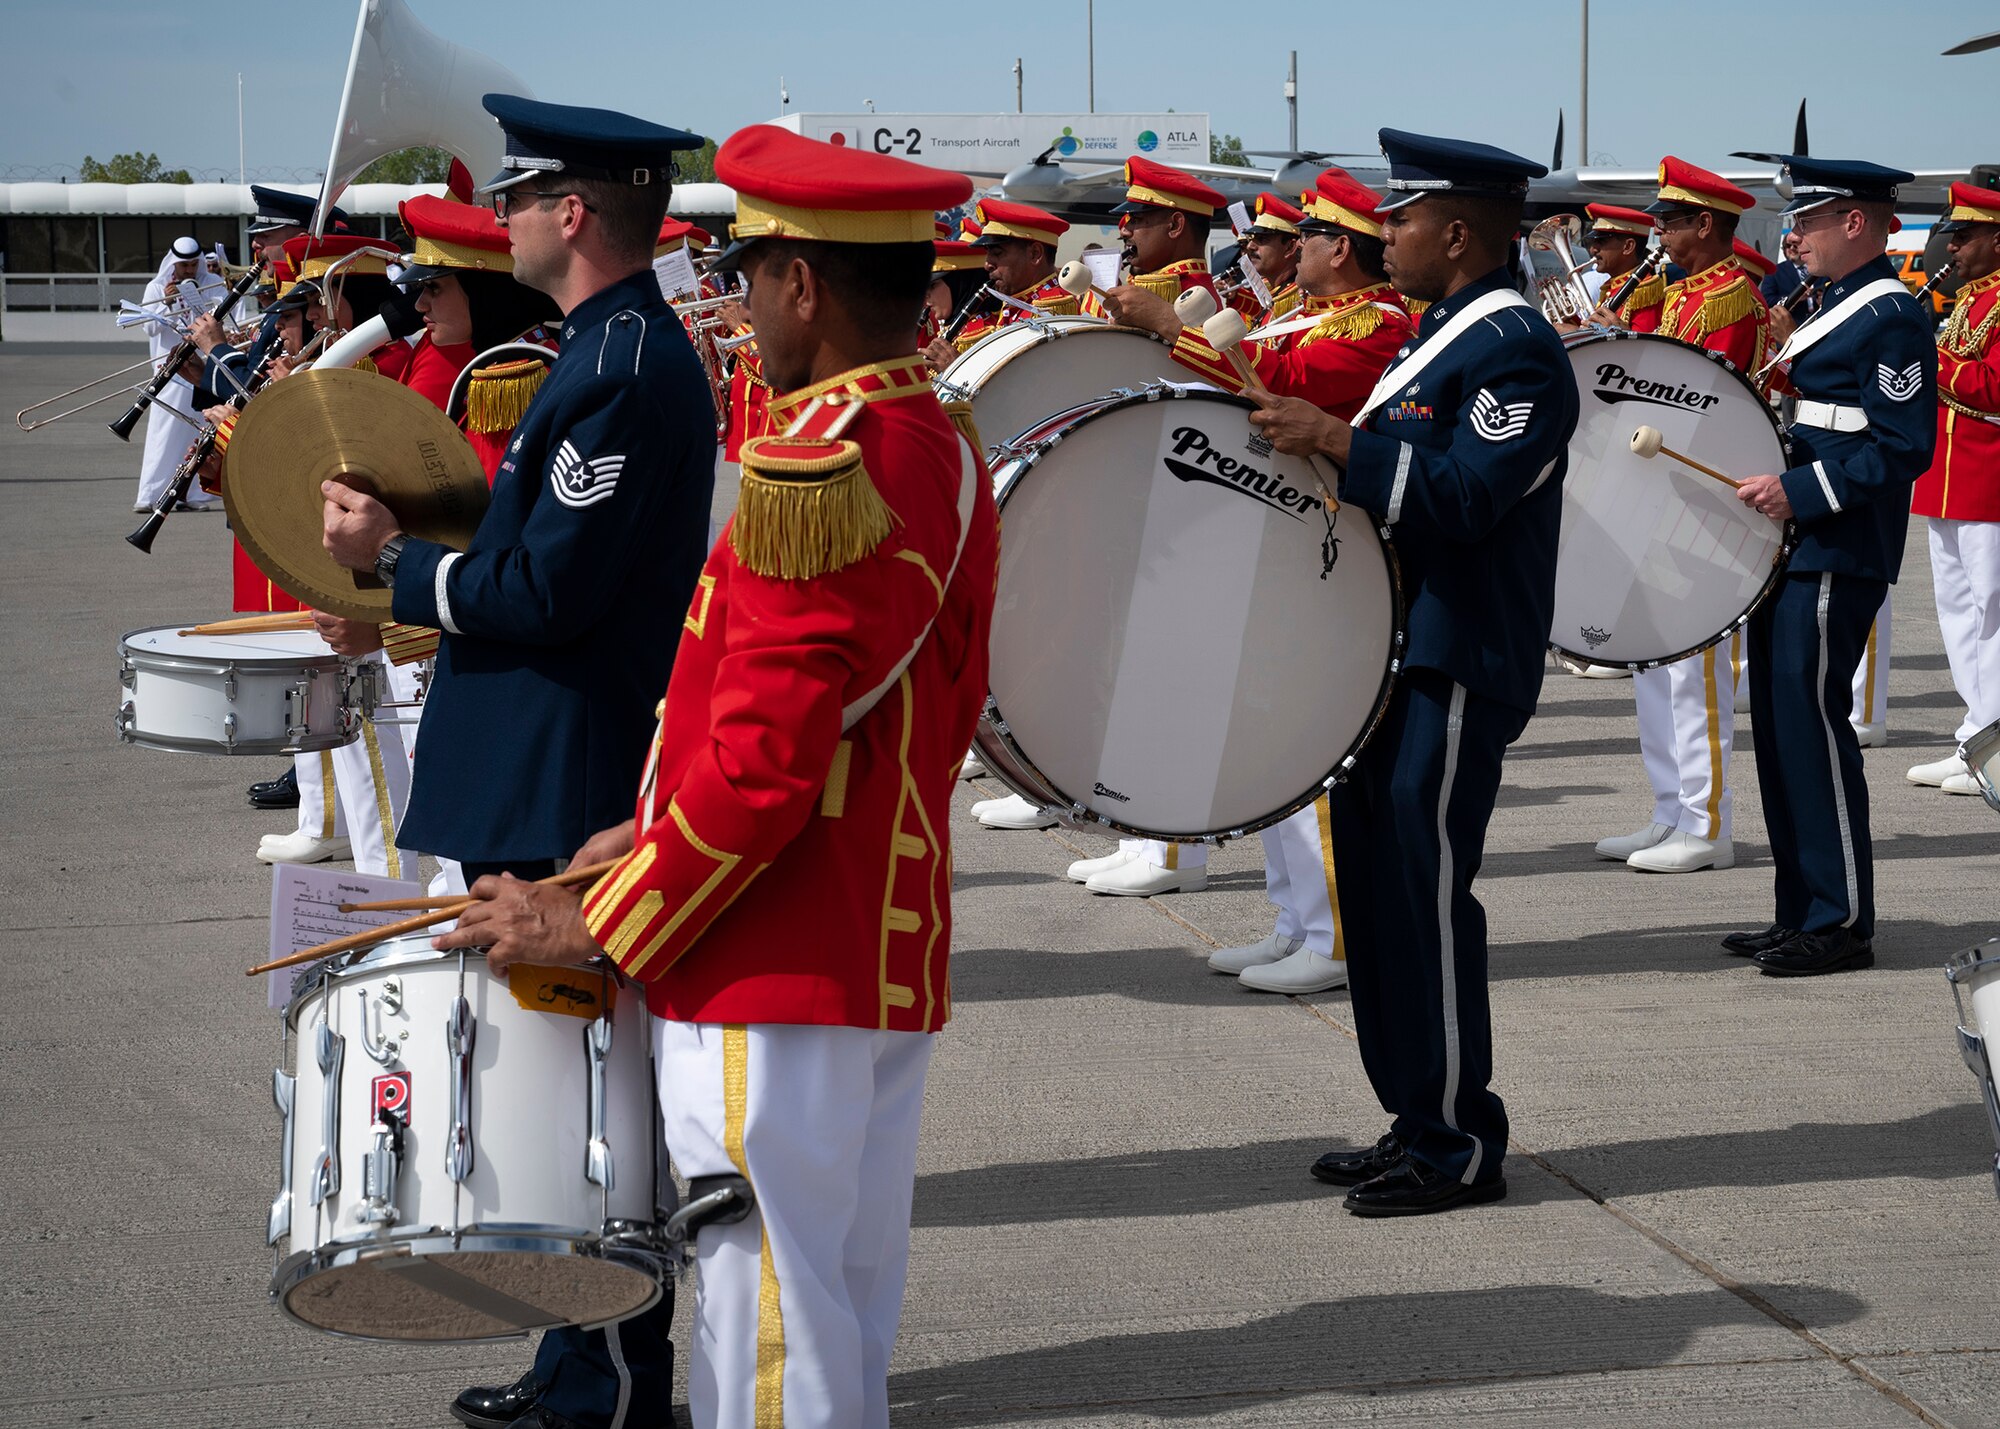 US and UAE Band service members perform.